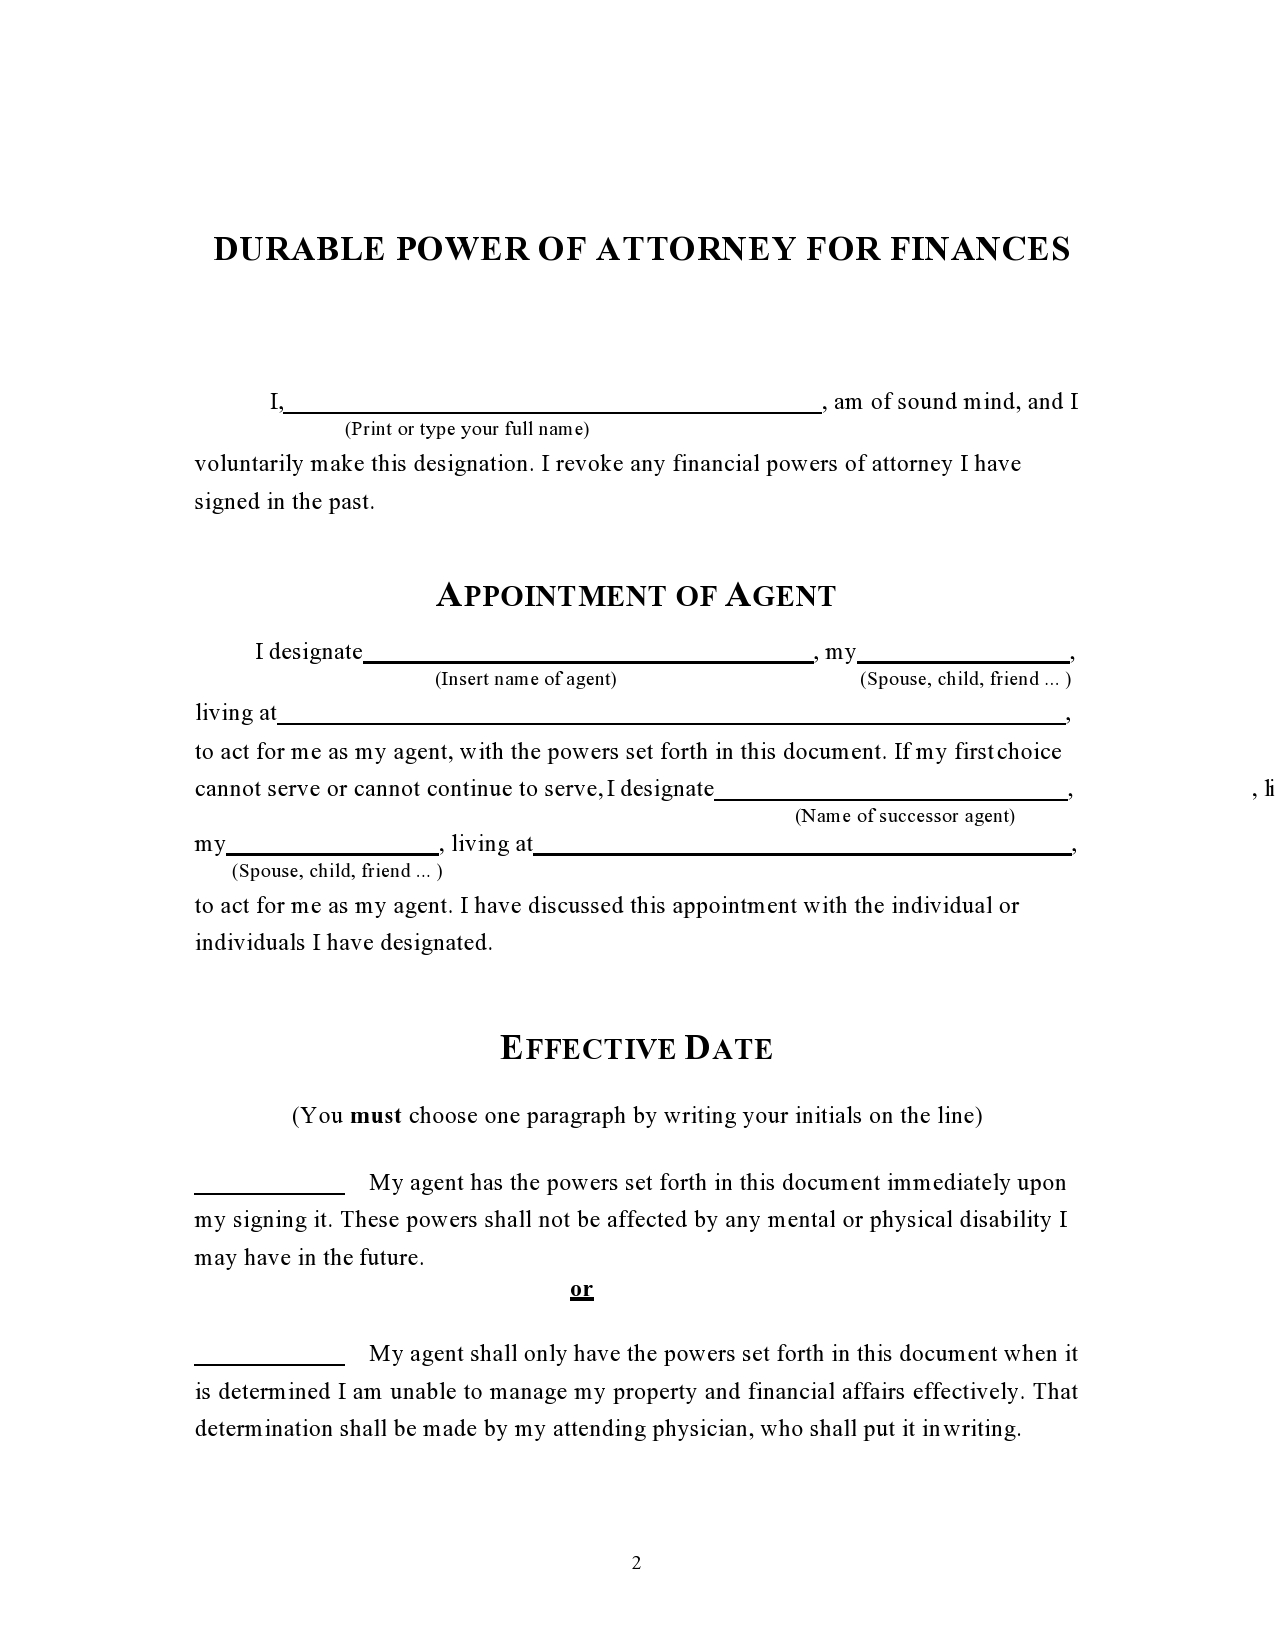 Free durable power of attorney 39